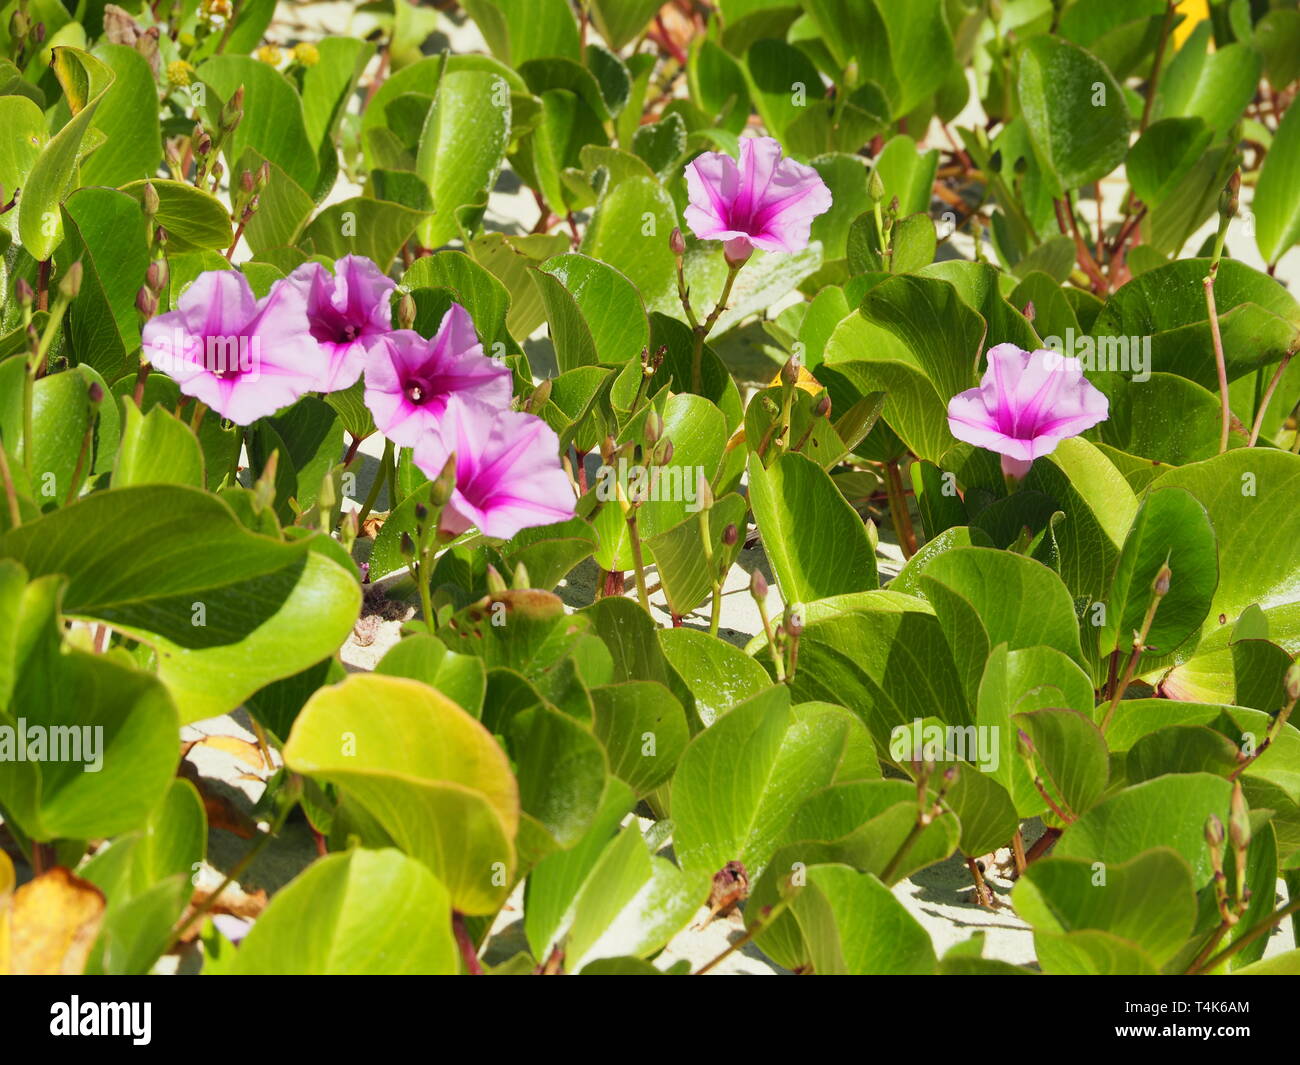 Pink Morning Glory vine flowers amongst the green leaves at the beach growing along the sand Stock Photo